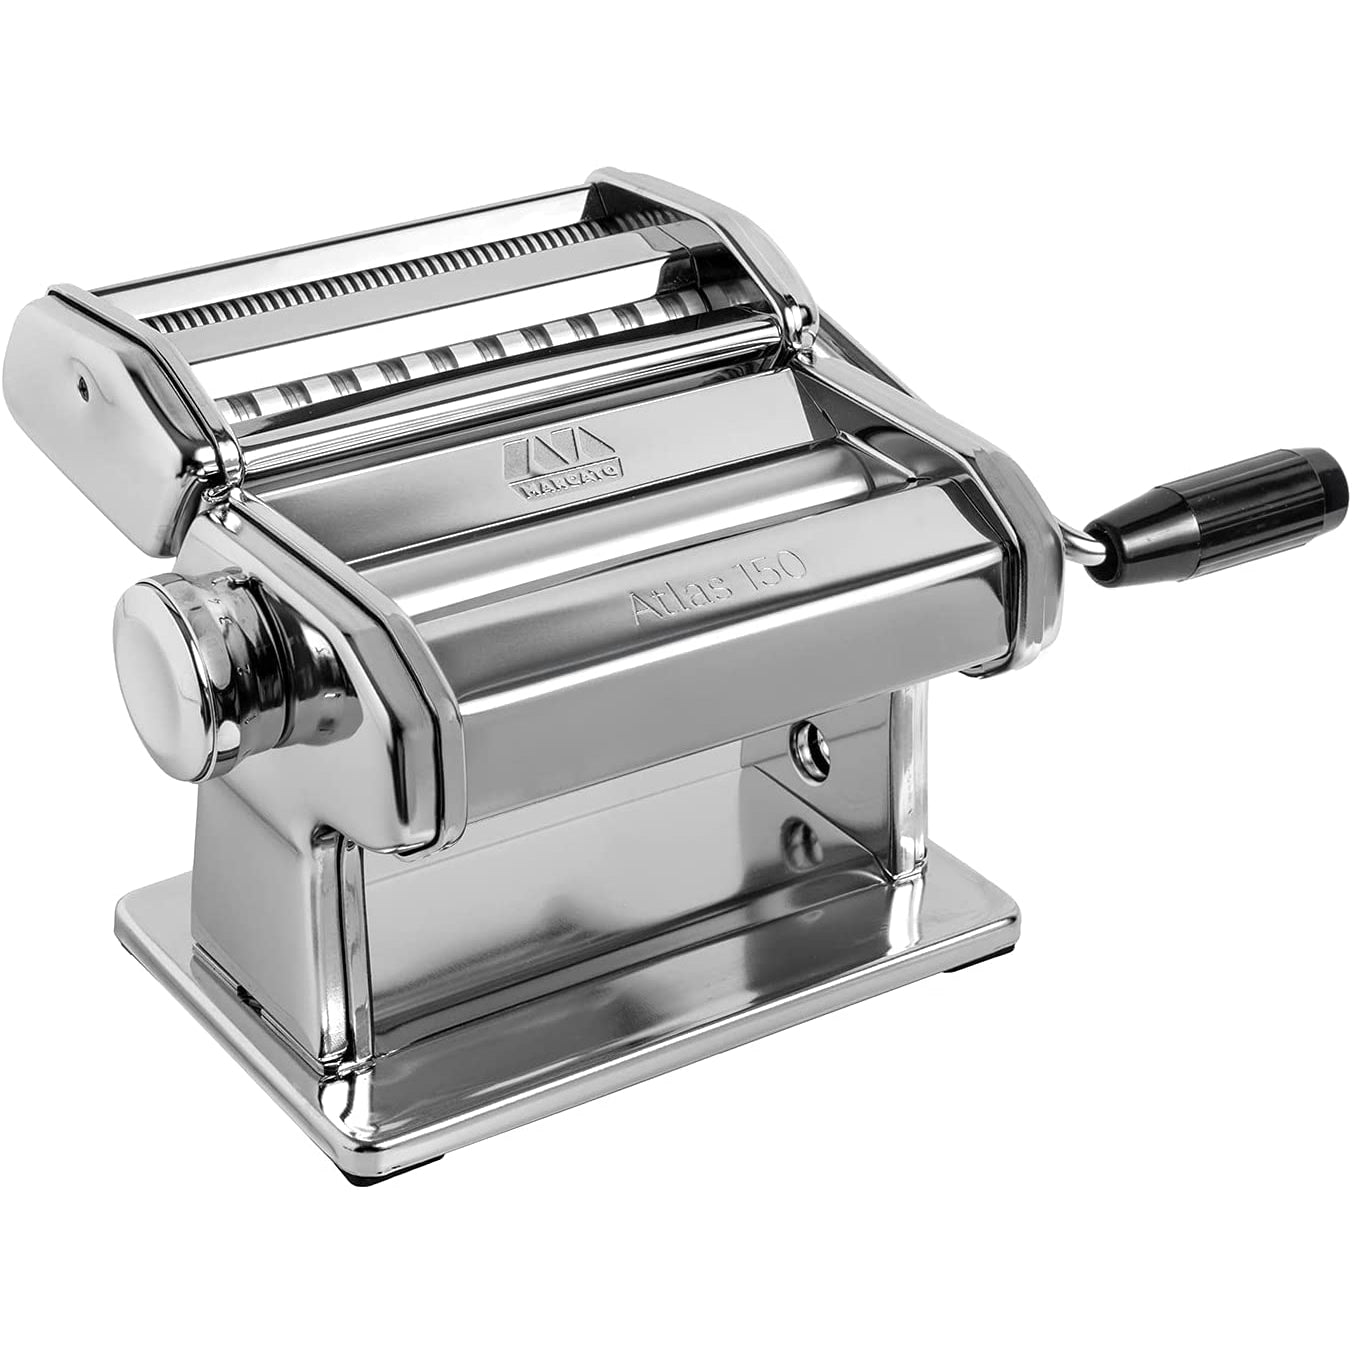 Marcato Atlas 150 Pasta Maker with Cutter, Hand Crank, and Instruction Manual